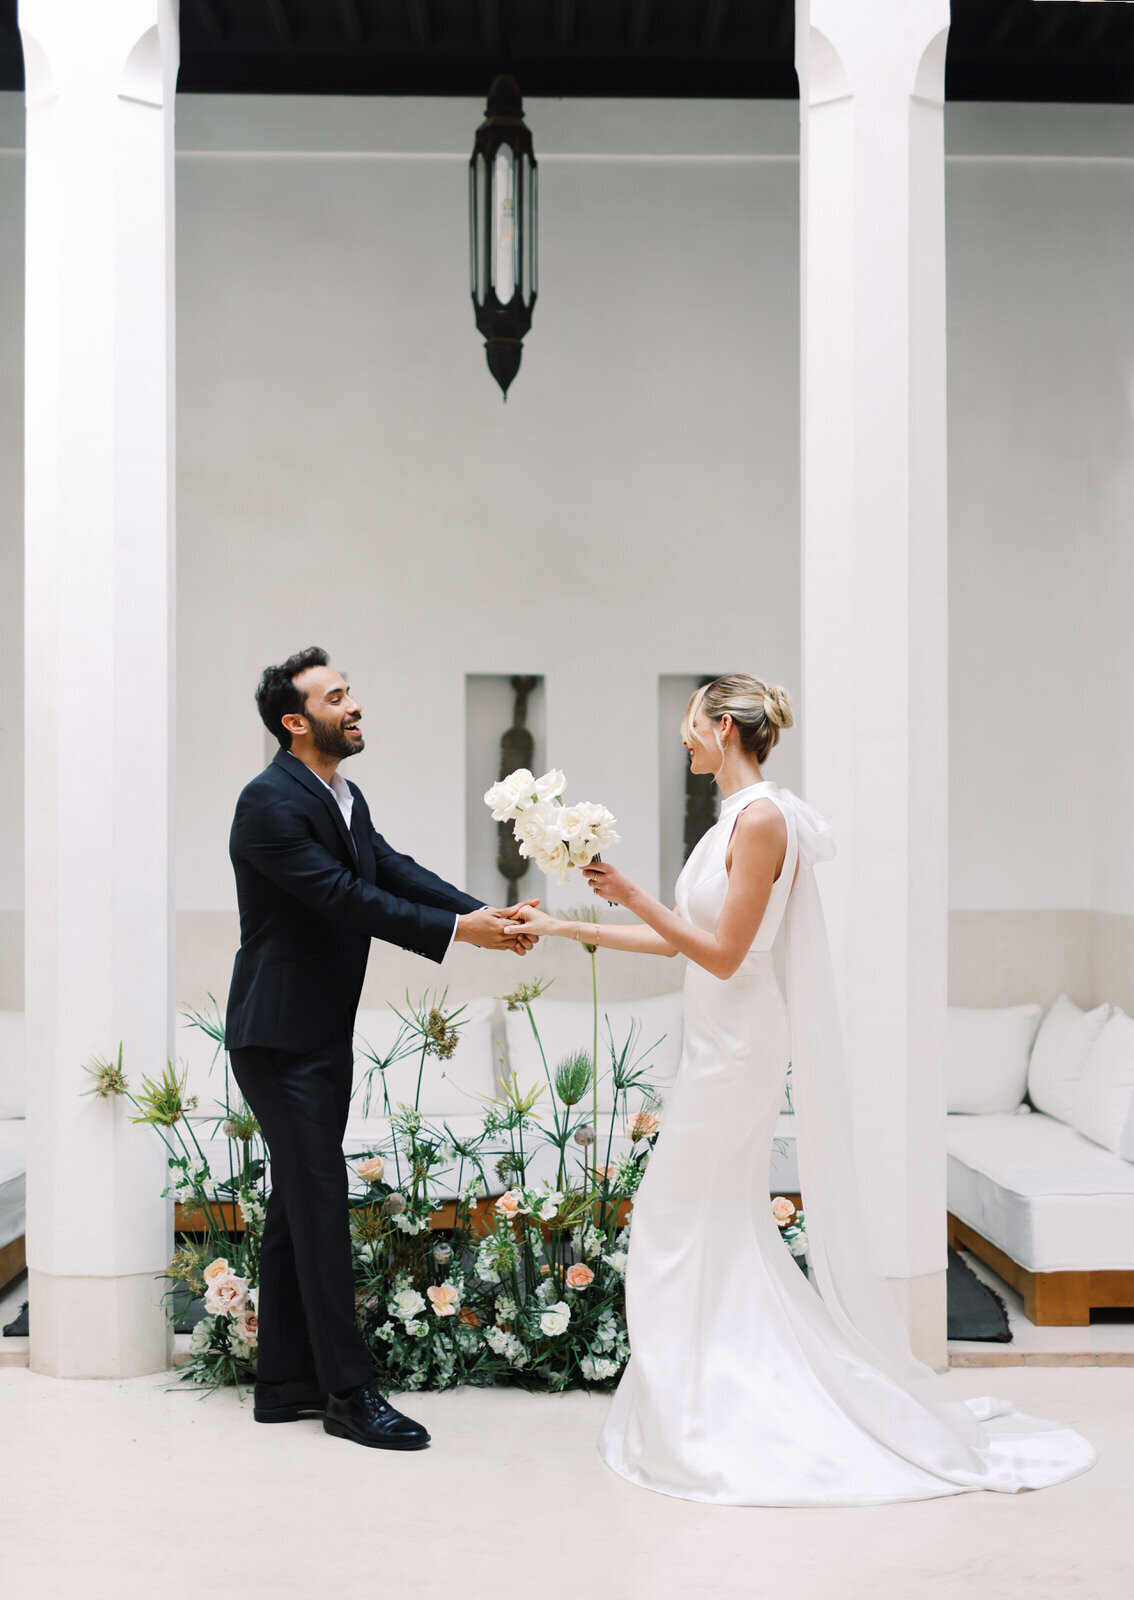 Stylish Elopement Photography in Marrakech 4